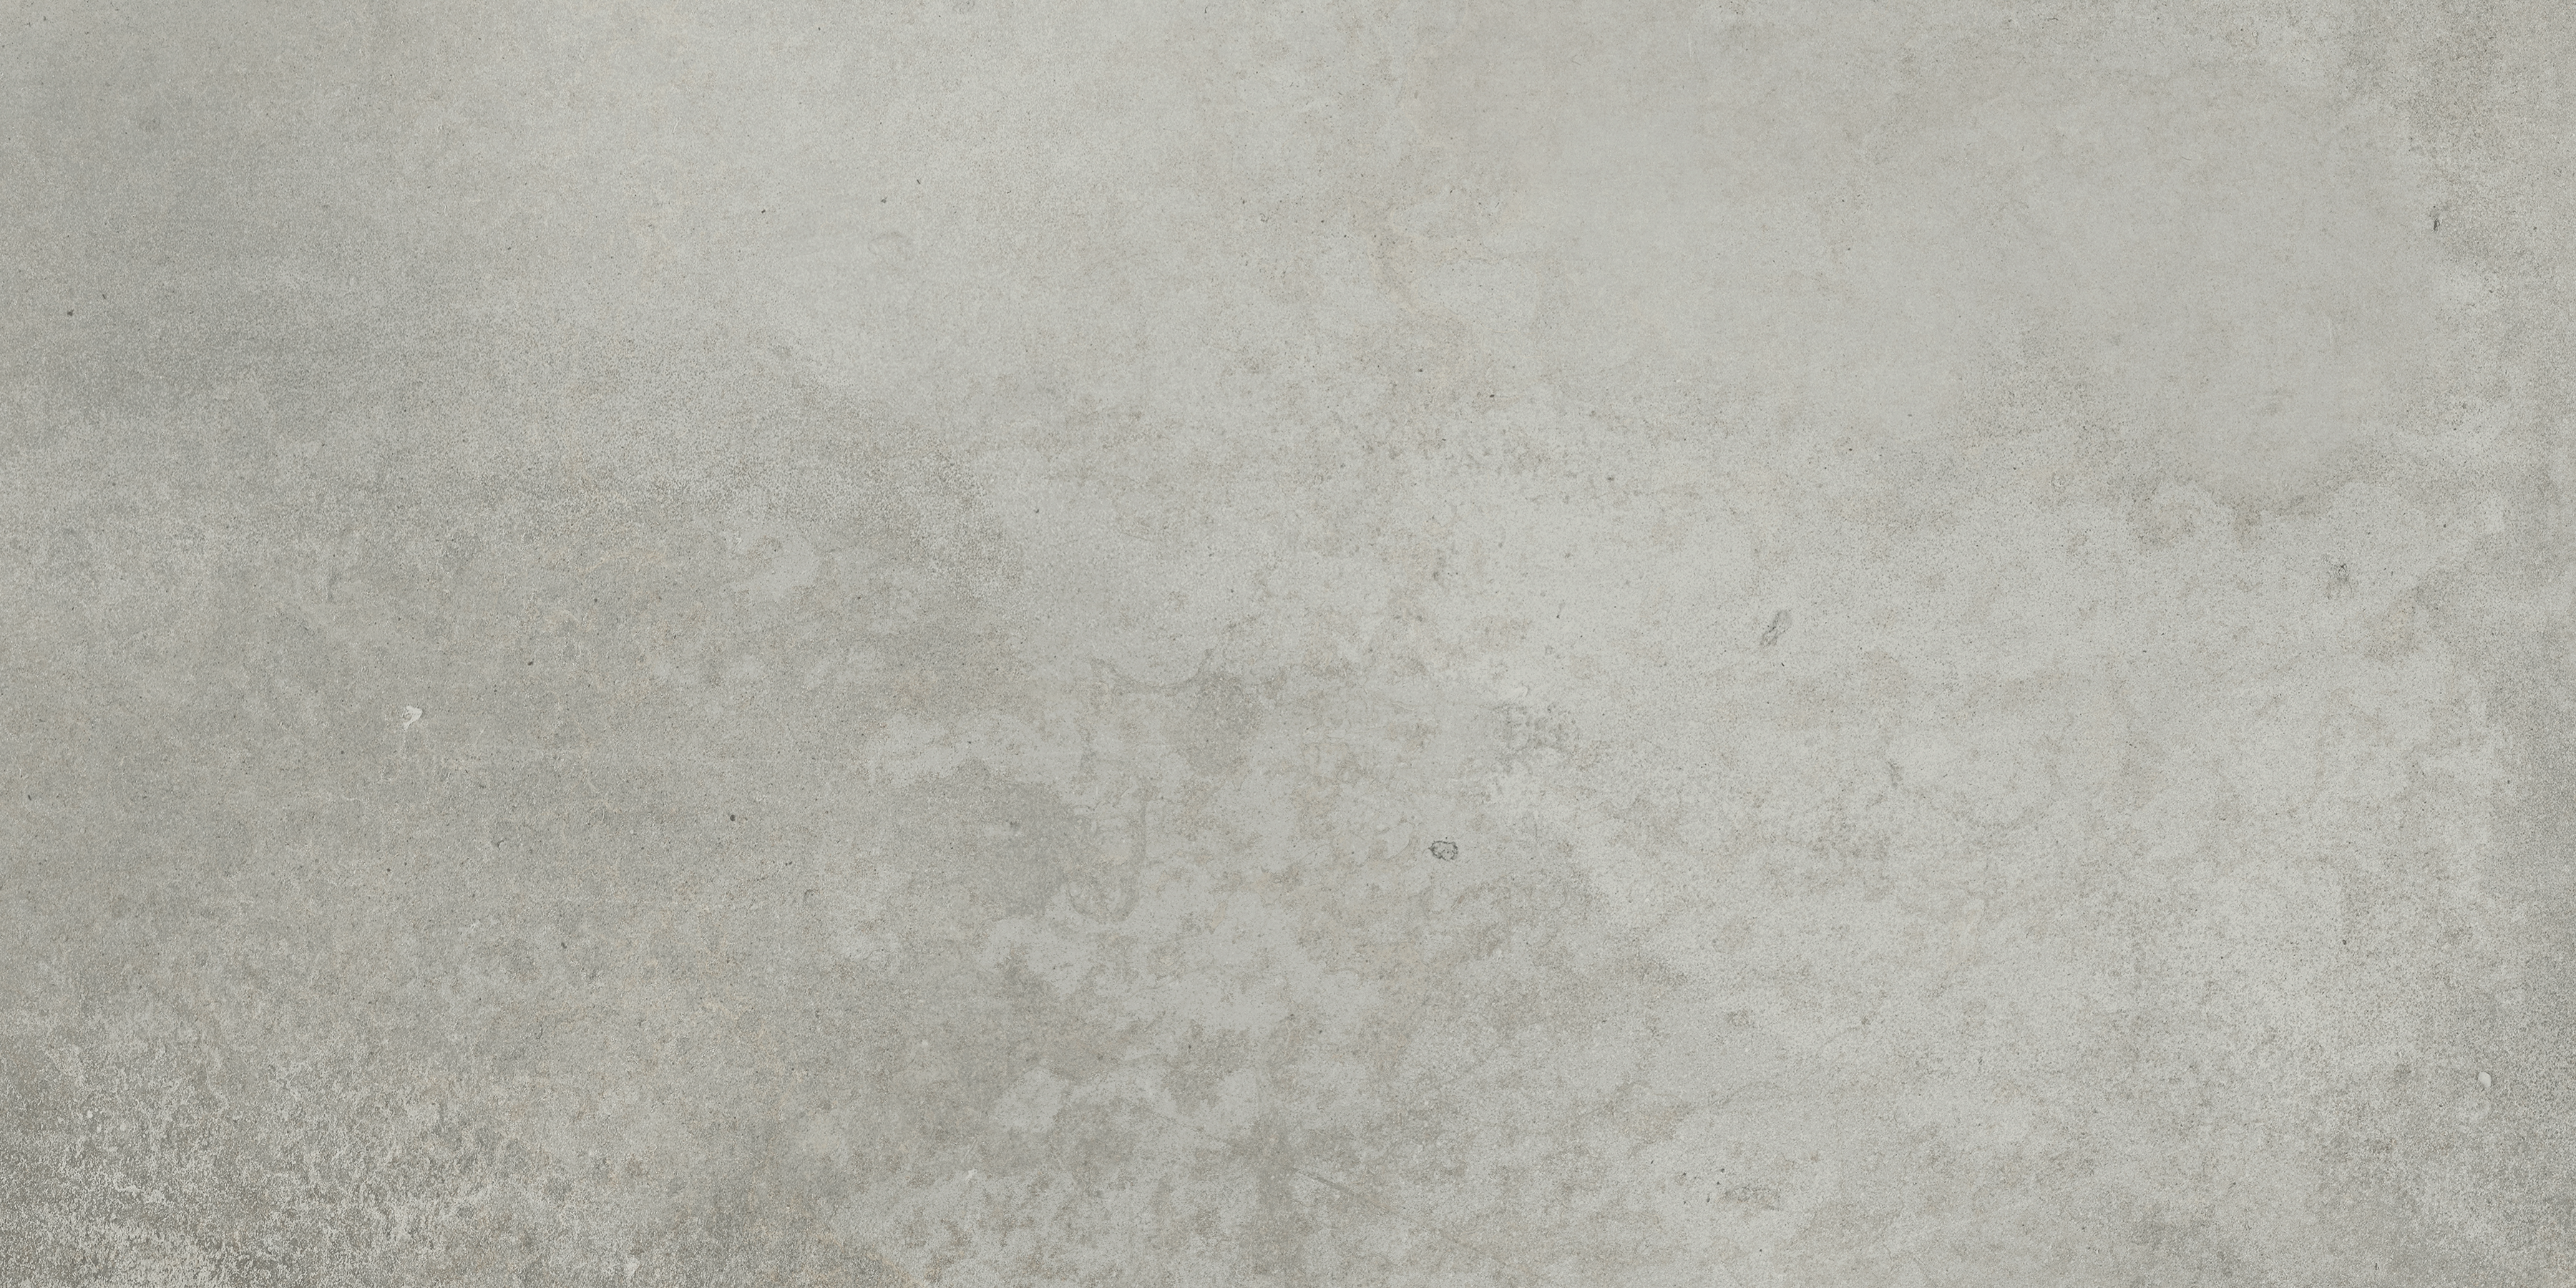 chromium pattern color body porcelain field tile from ceraforge anatolia collection distributed by surface group international matte finish rectified edge 12x24 rectangle shape